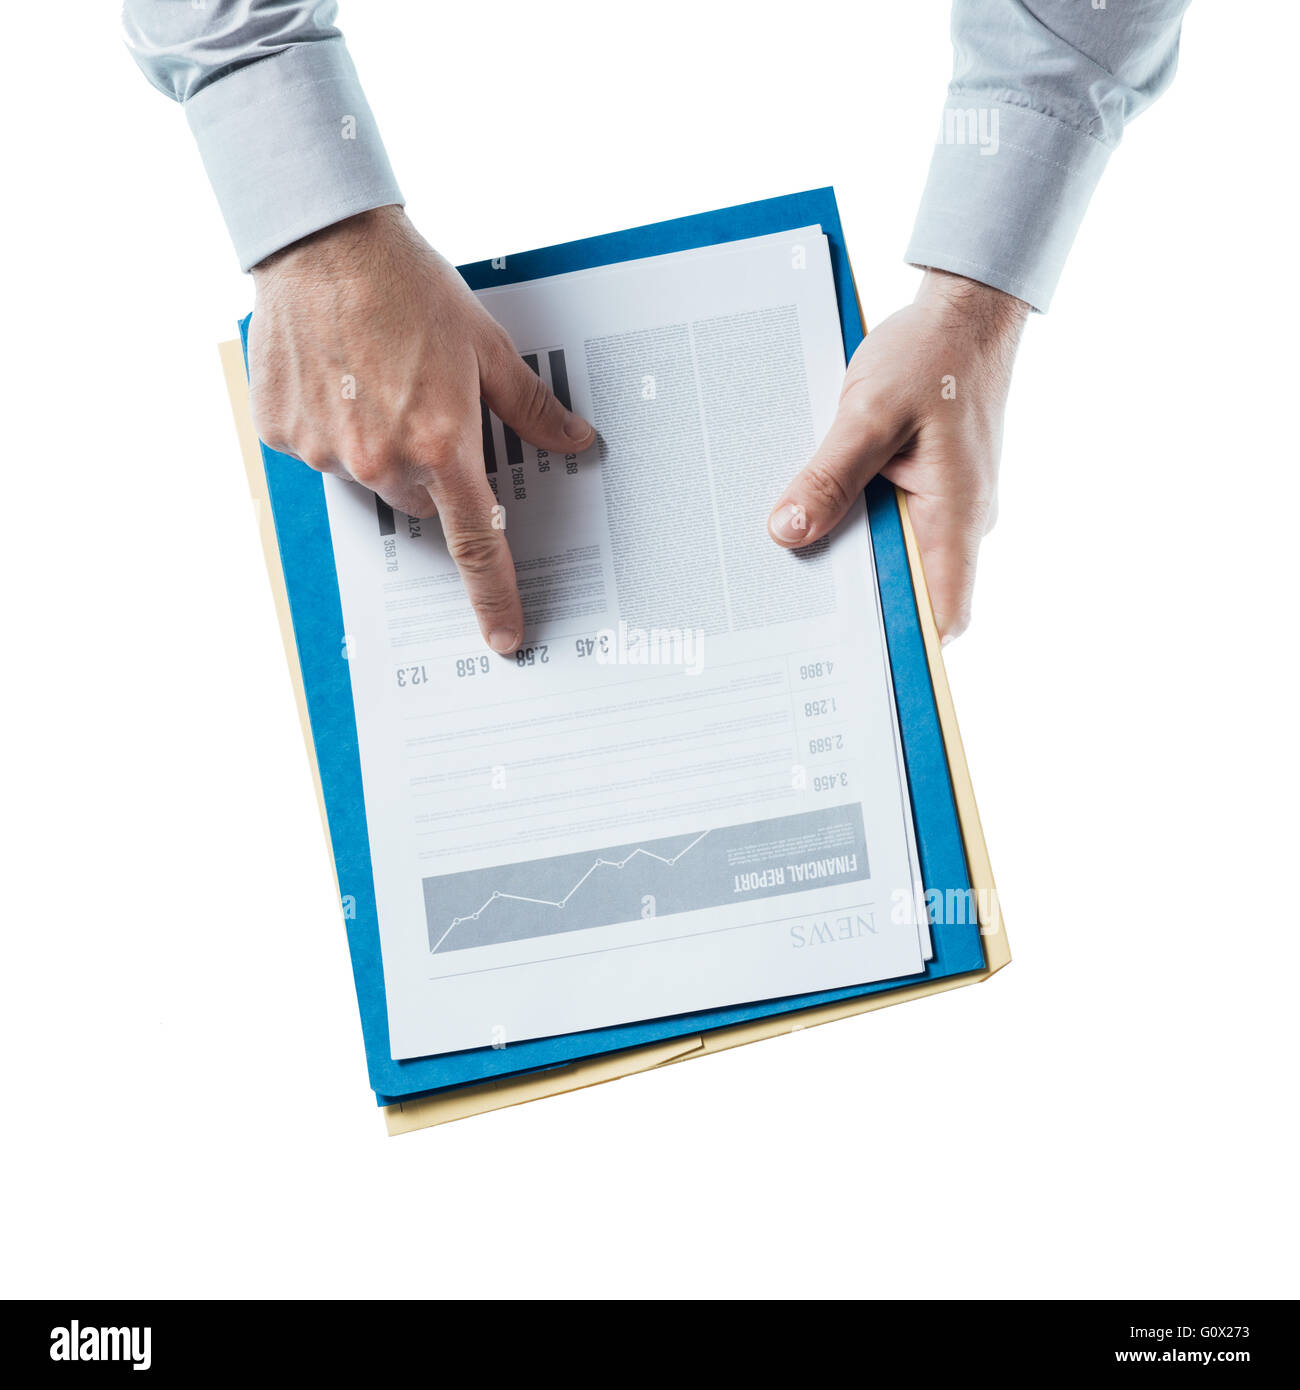 Businessman holding a financial report and pointing at at number, hands close up, top view Stock Photo